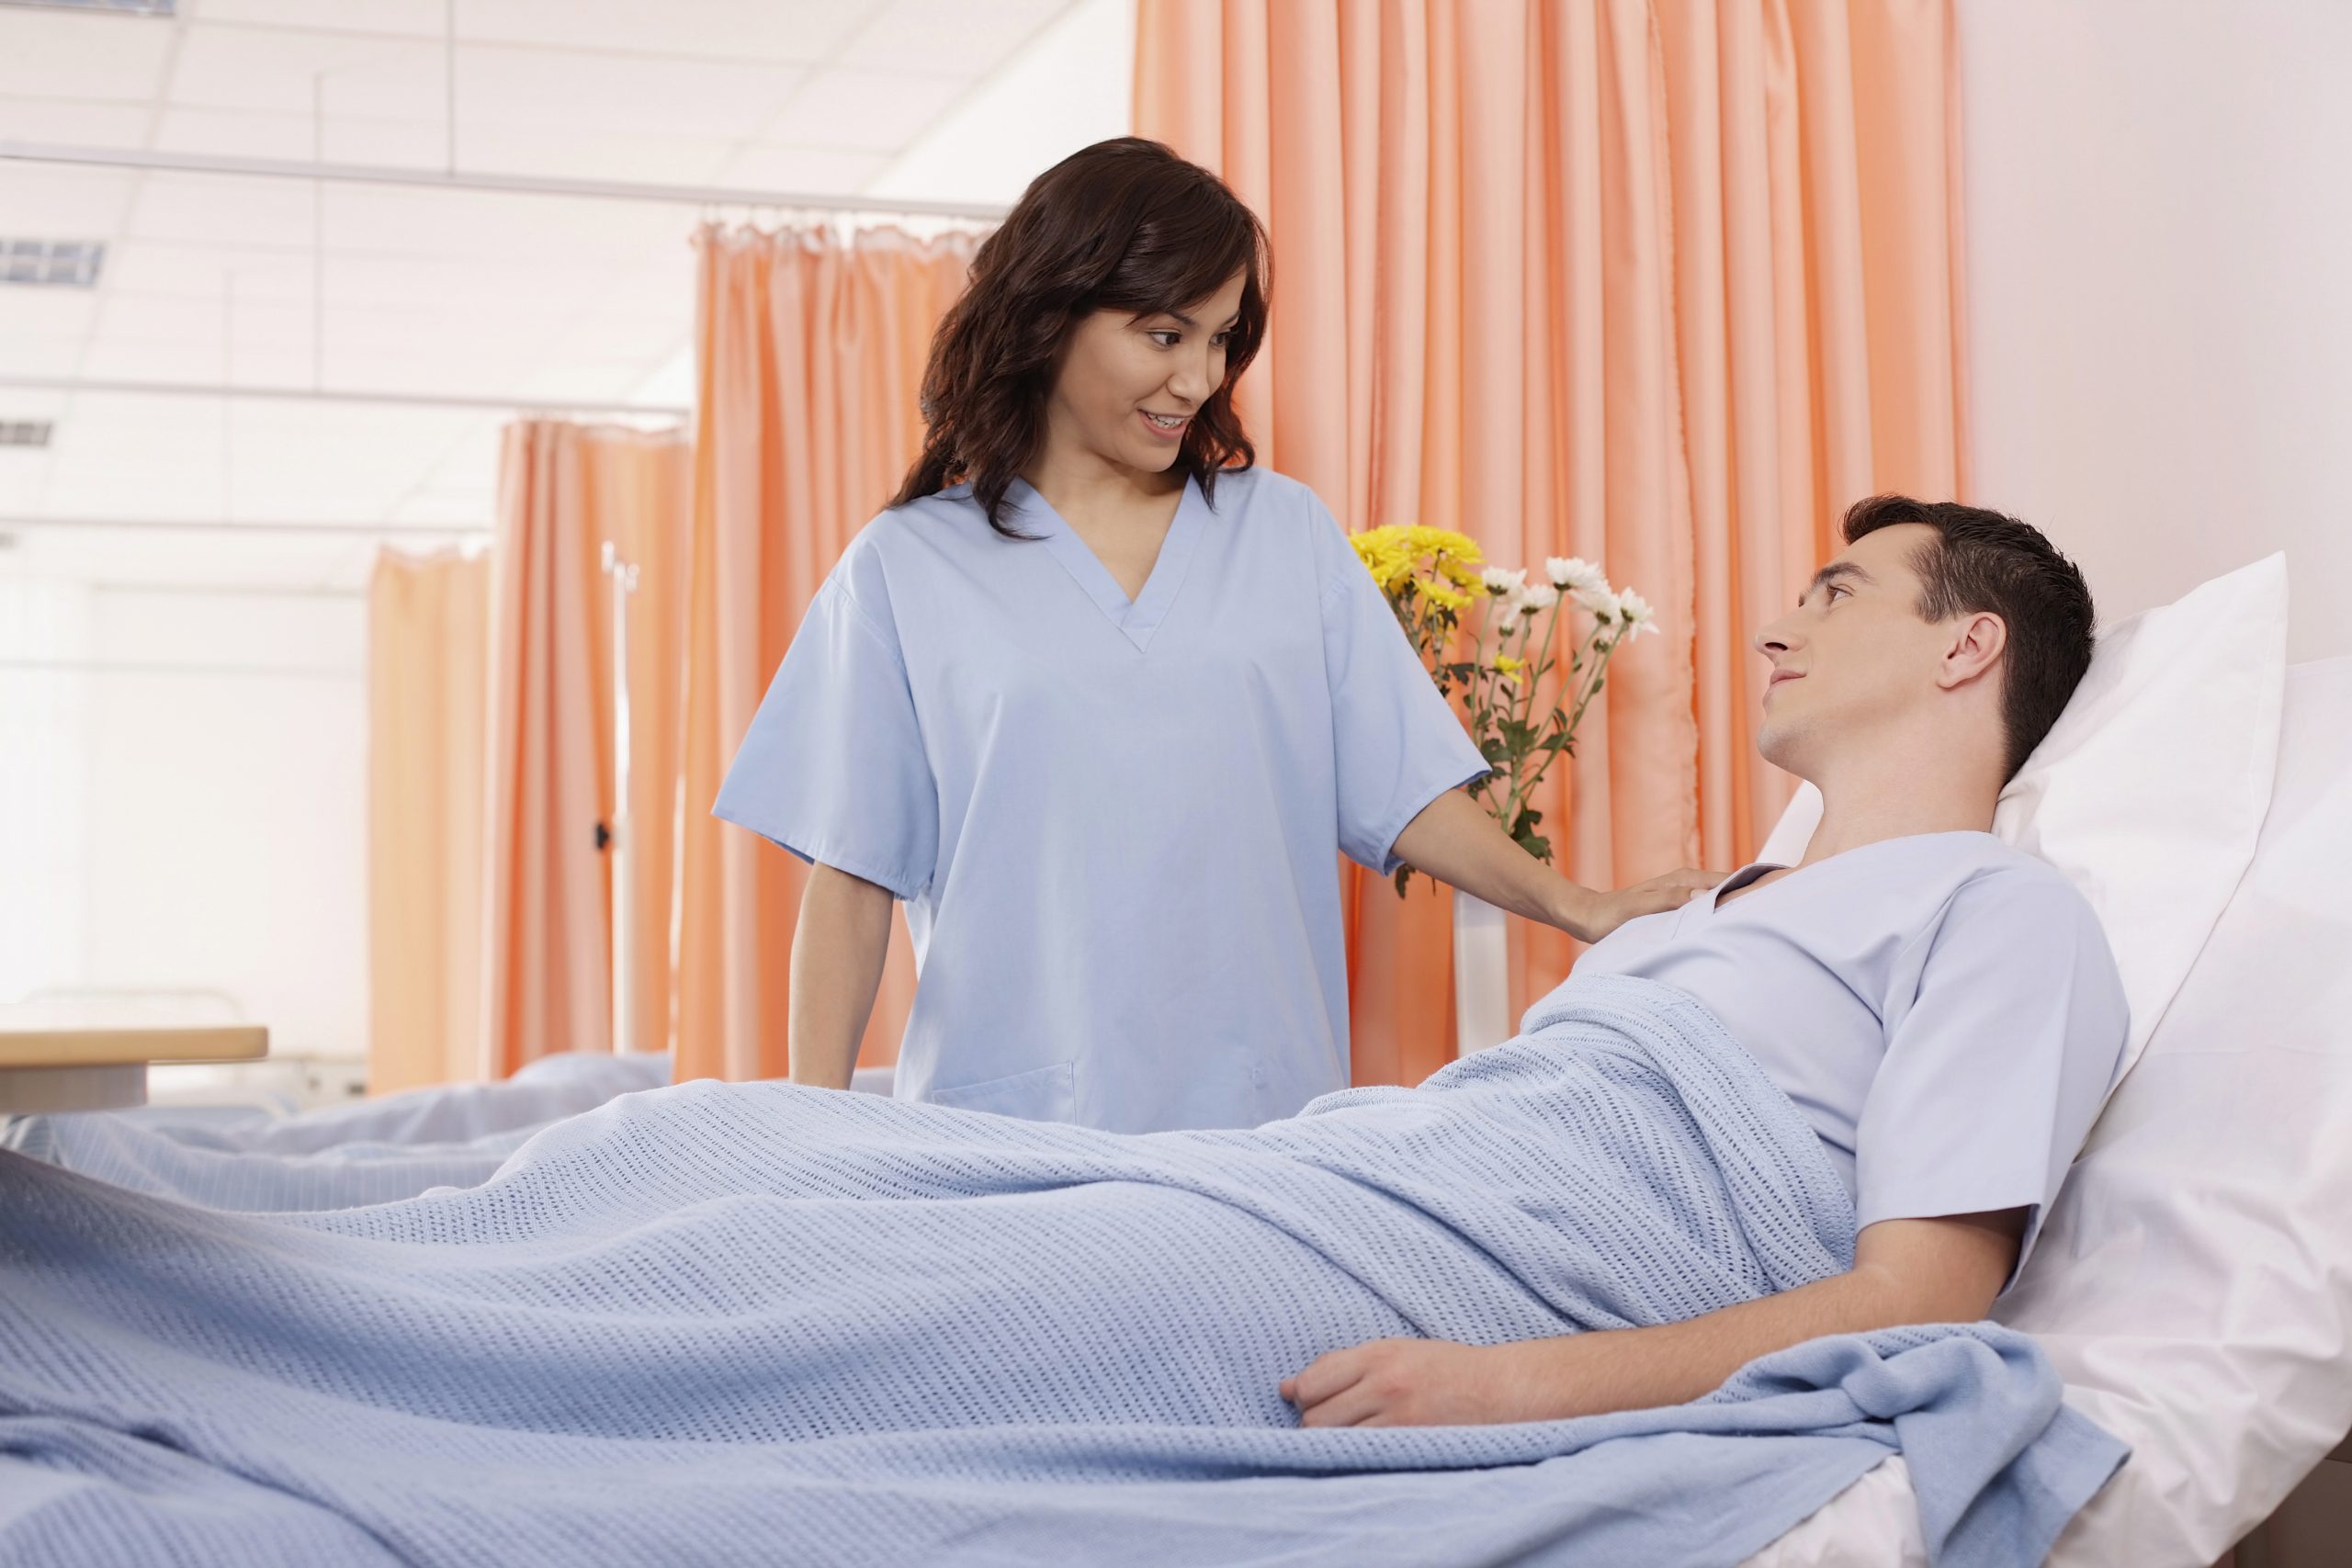 What is a Wound Care Nurse?